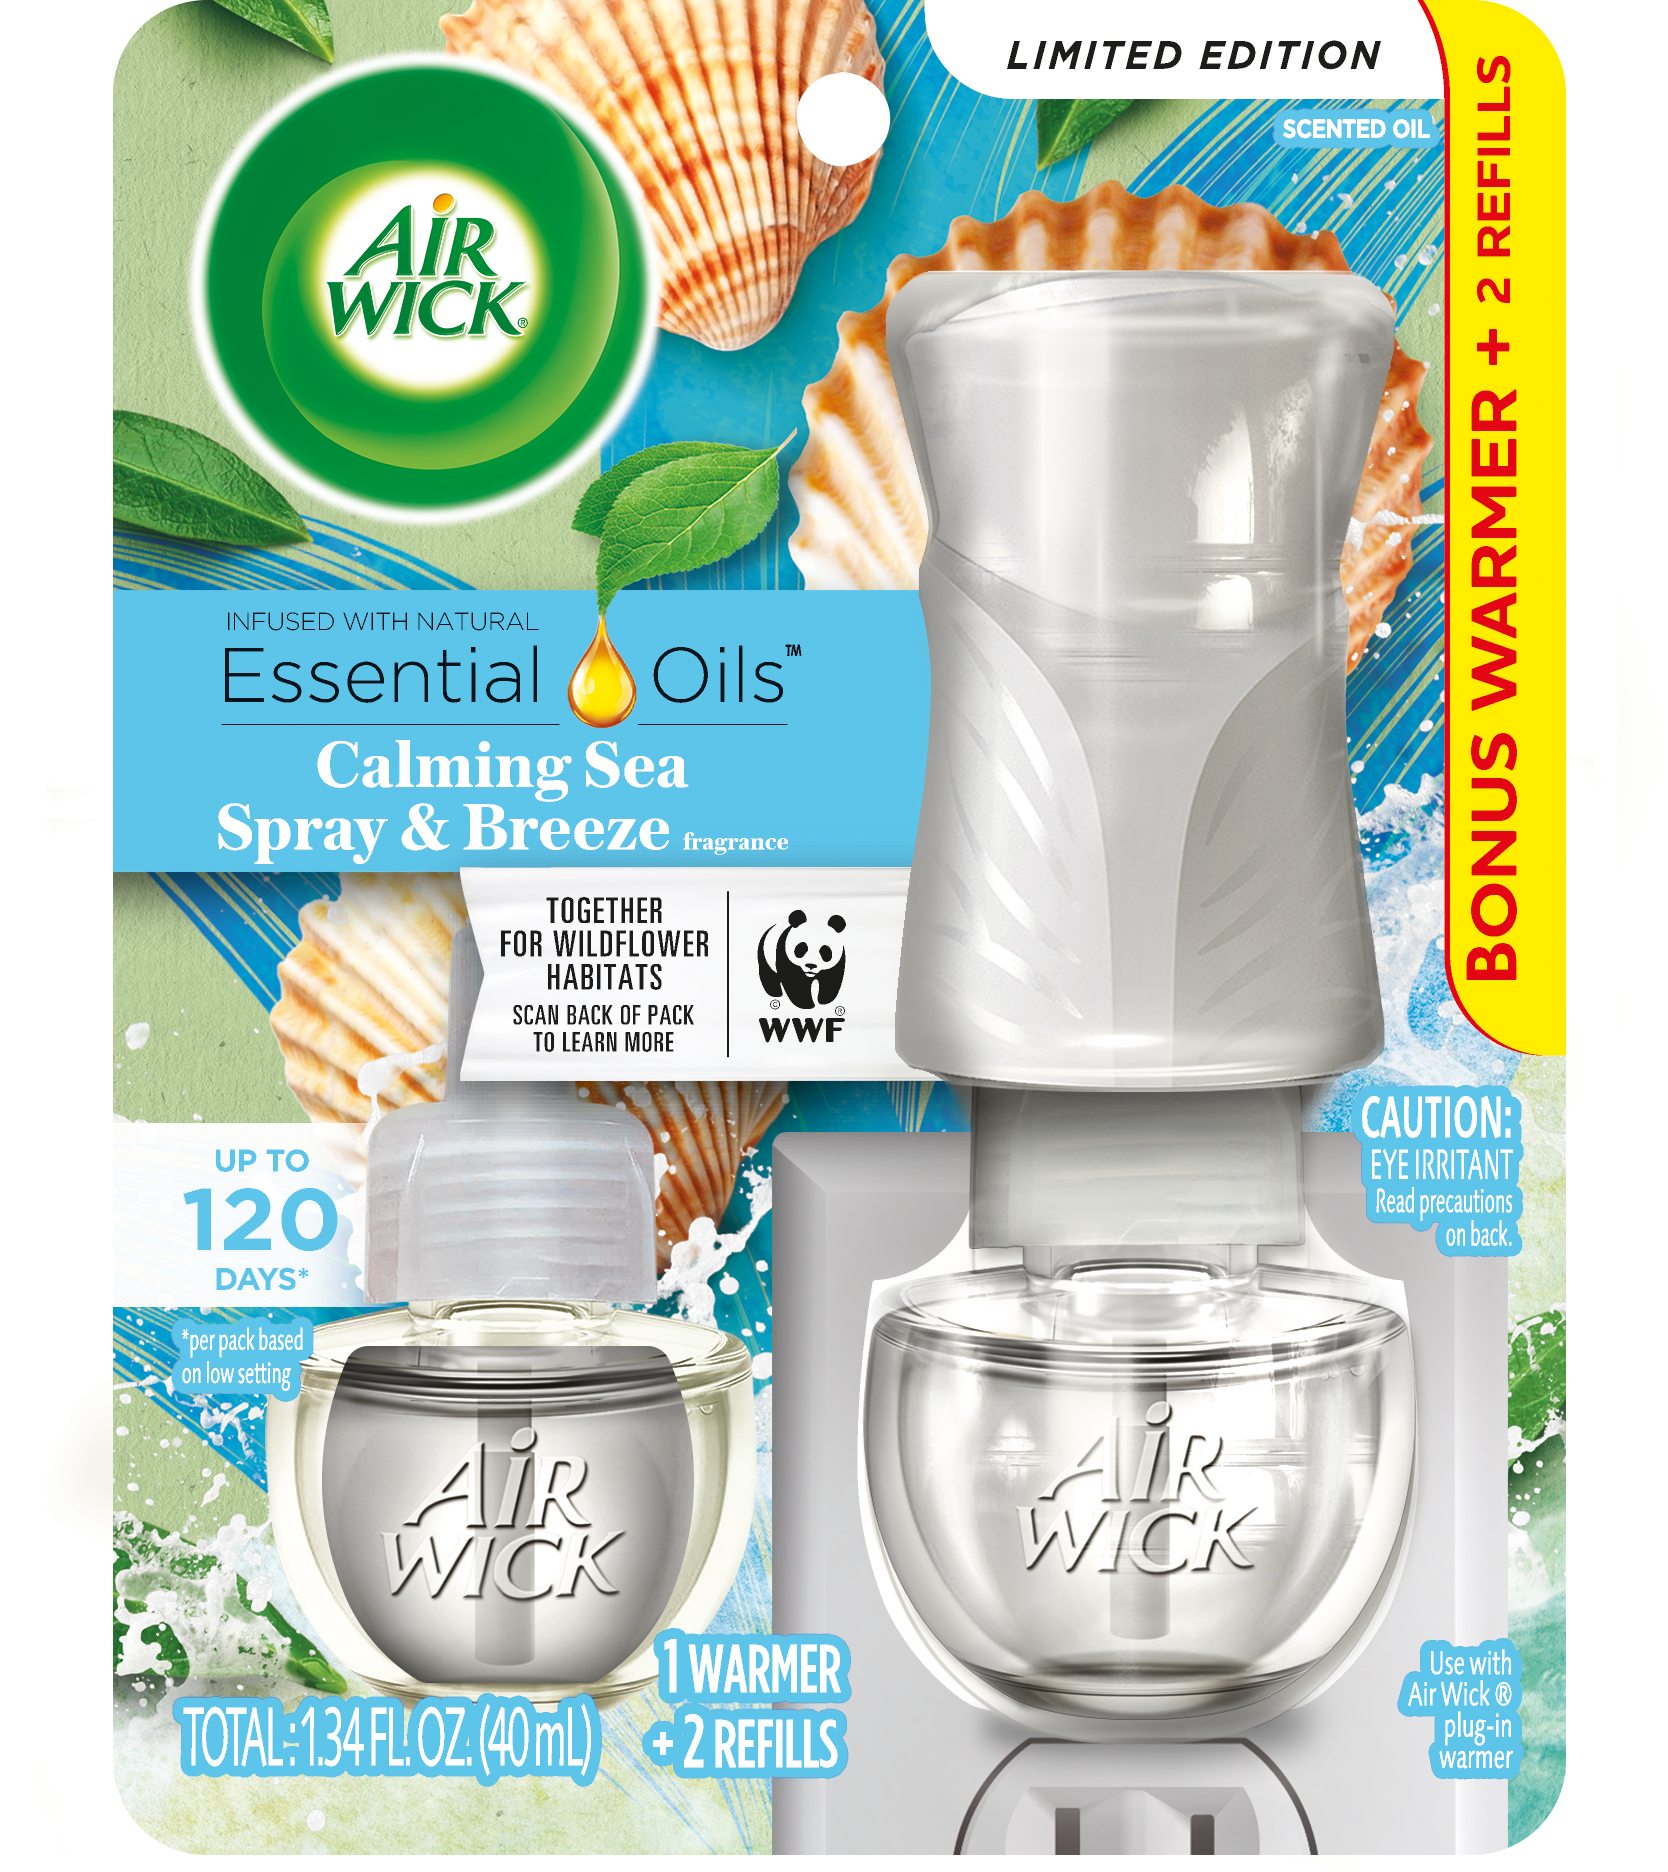 AIR WICK® Scented Oil - Calming Sea Spray & Breeze - Kit